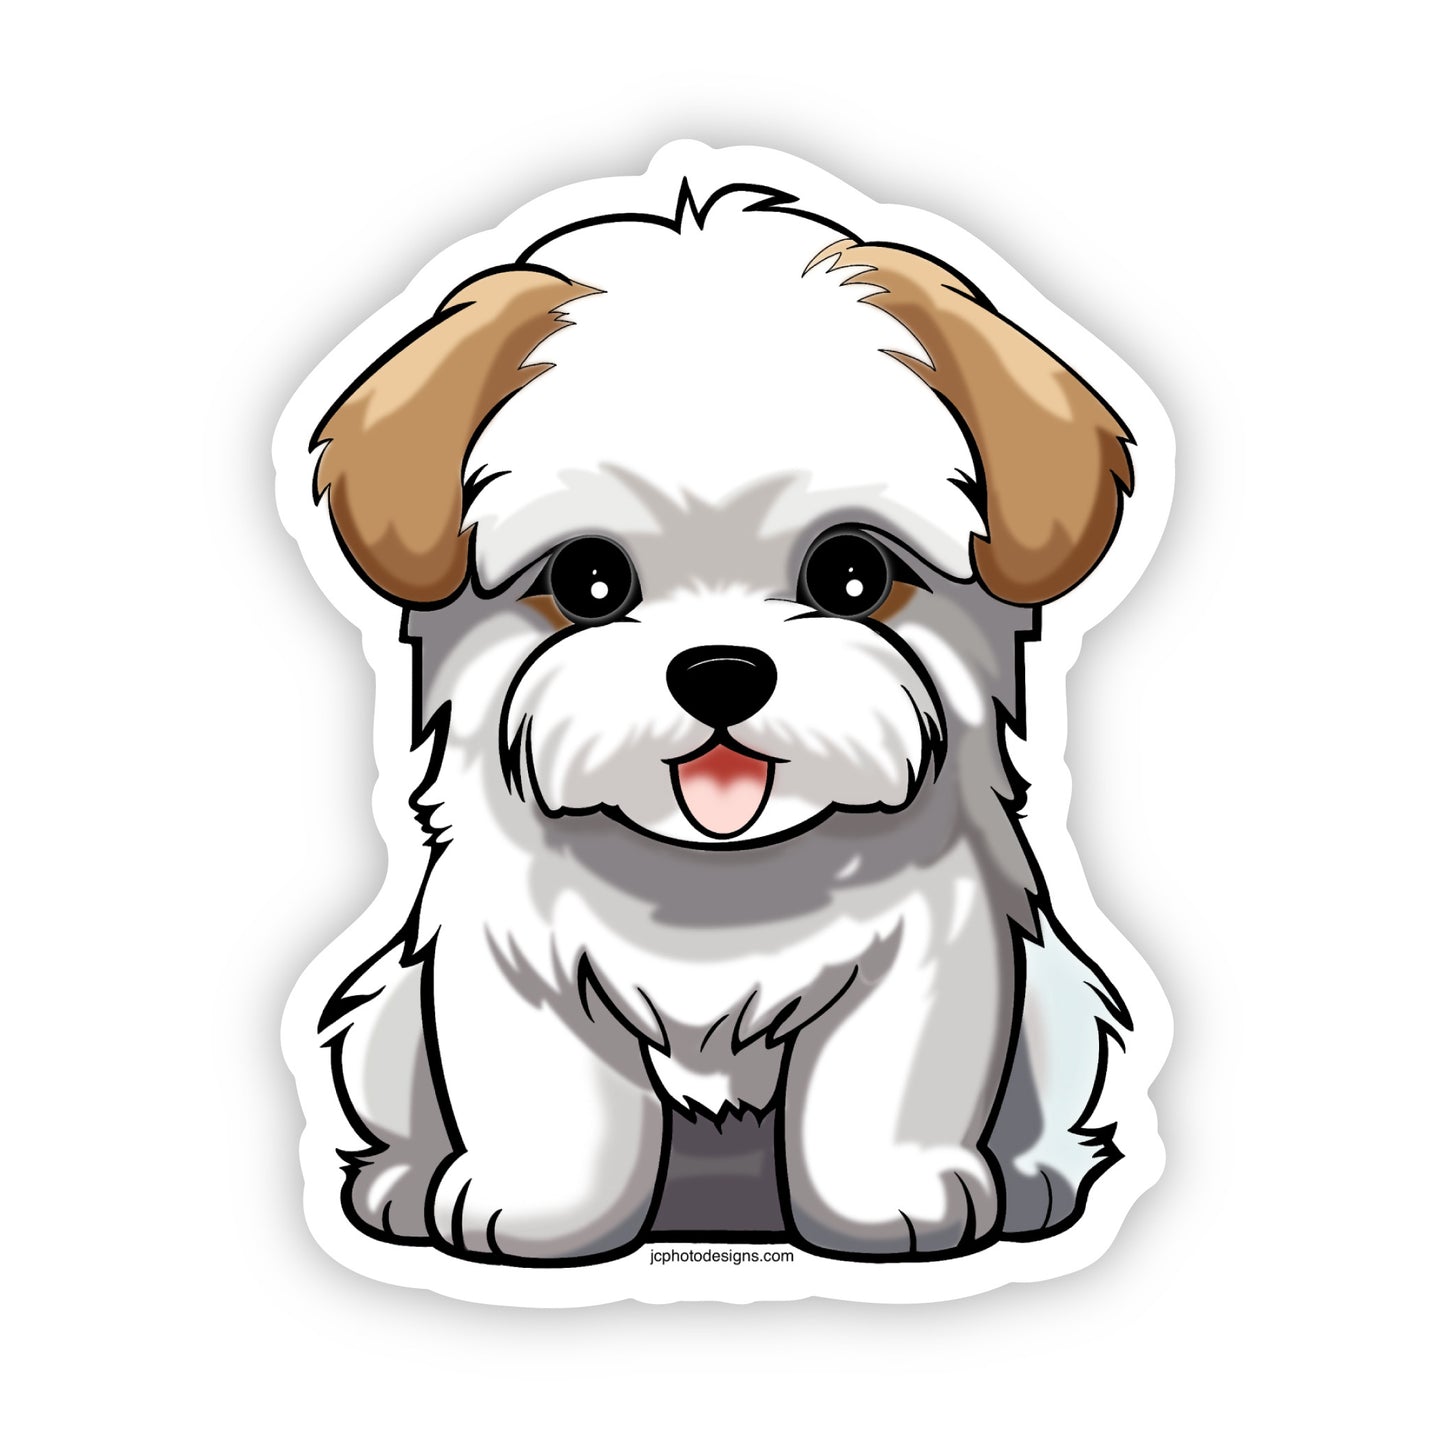 Fluffy White and Tan Maltese Puppy Sticker – Adorable Dog Decal